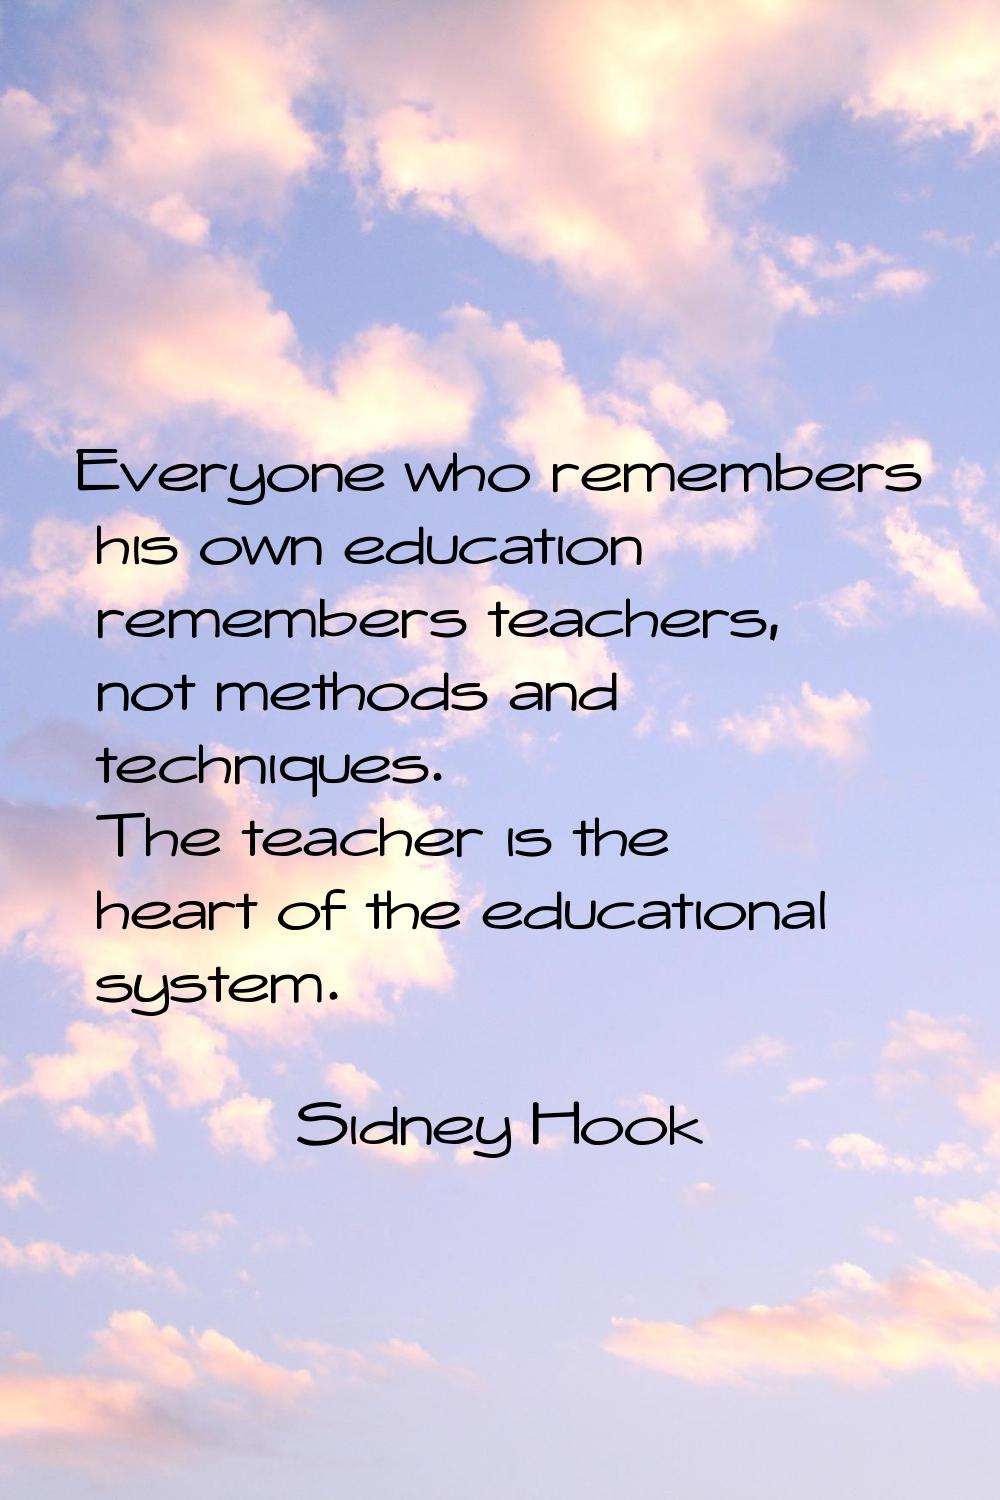 Everyone who remembers his own education remembers teachers, not methods and techniques. The teache